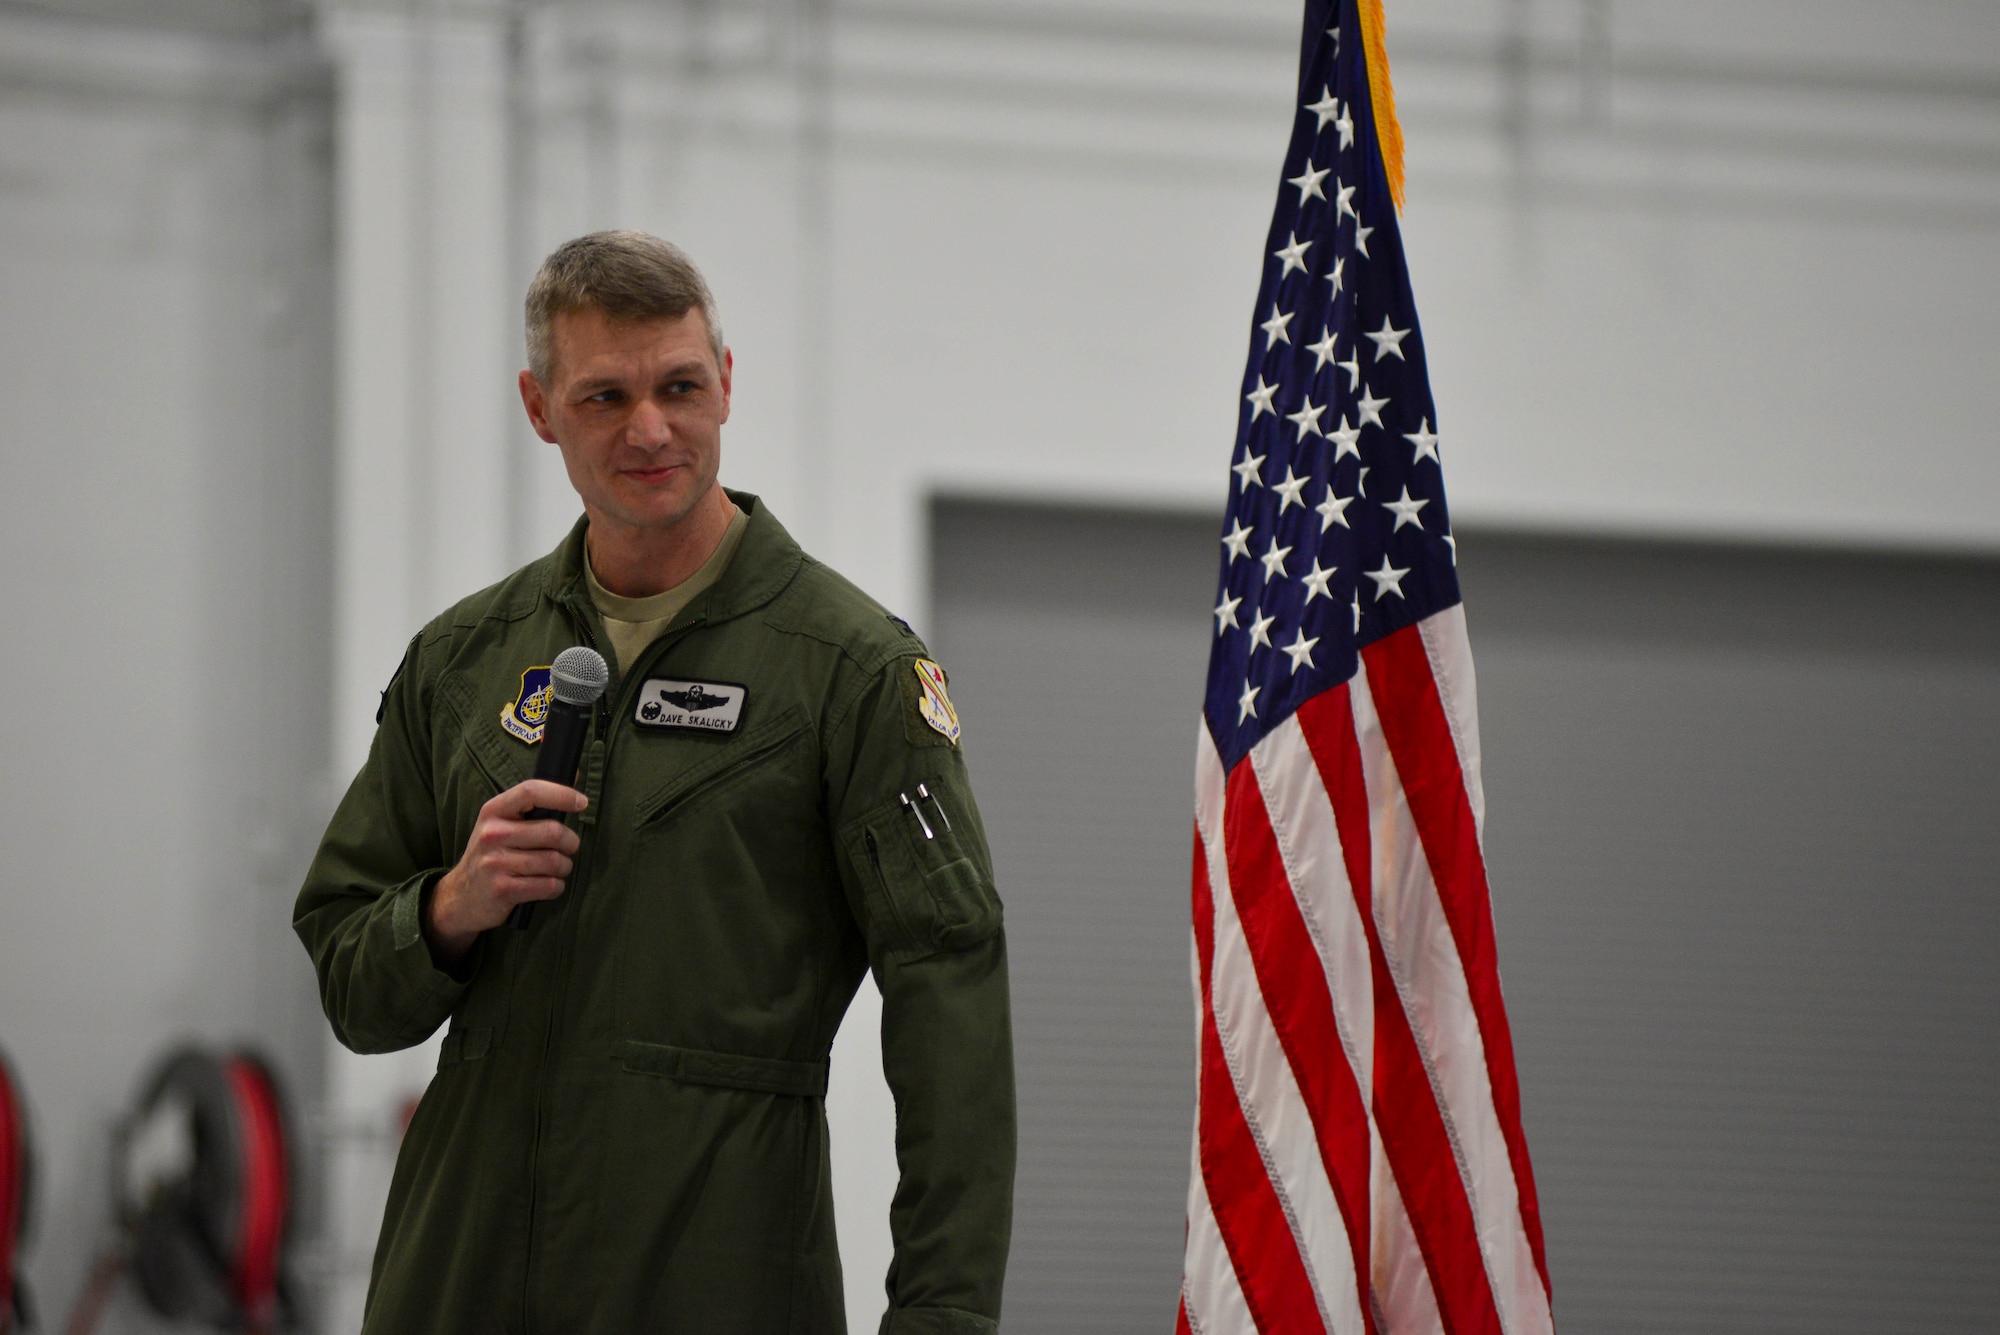 U.S. Air Force Col. David Skalicky, the 354th Operations Group commander, speaks during the 355th Fighter Squadron reactivation ceremony Dec. 18, 2020, at Eielson Air Force Base, Alaska.